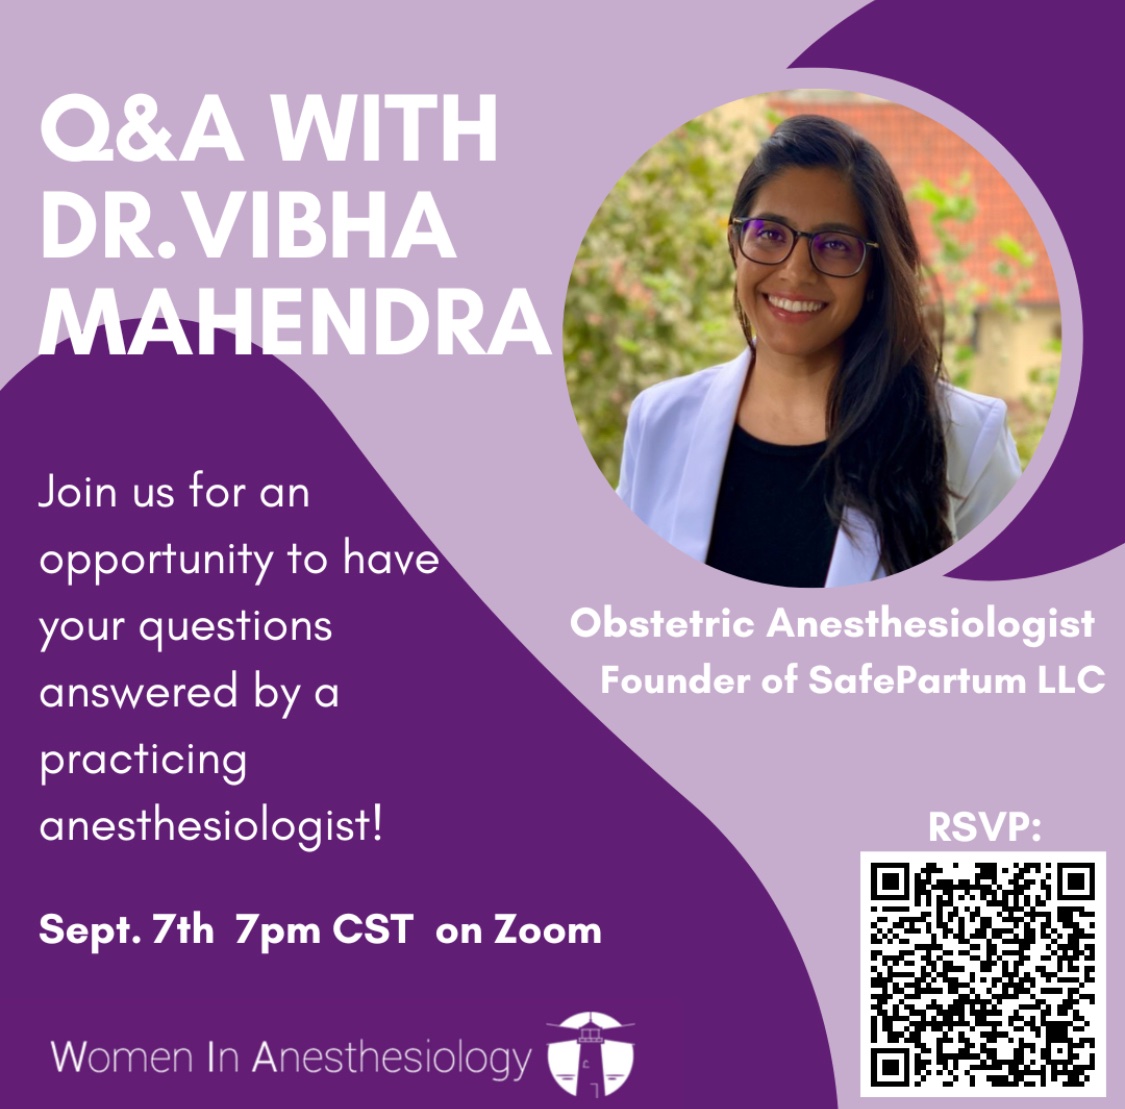 WIA’s Medical Student Component is thrilled to partner with Dr. Mahendra, Ob Anesthesiologist and CEO of @SafePartum 🙌🏼 This will be an open Q&A on all topics, including being a woman in medicine, life in residency/medical school, and being authentic to yourself. Link below.